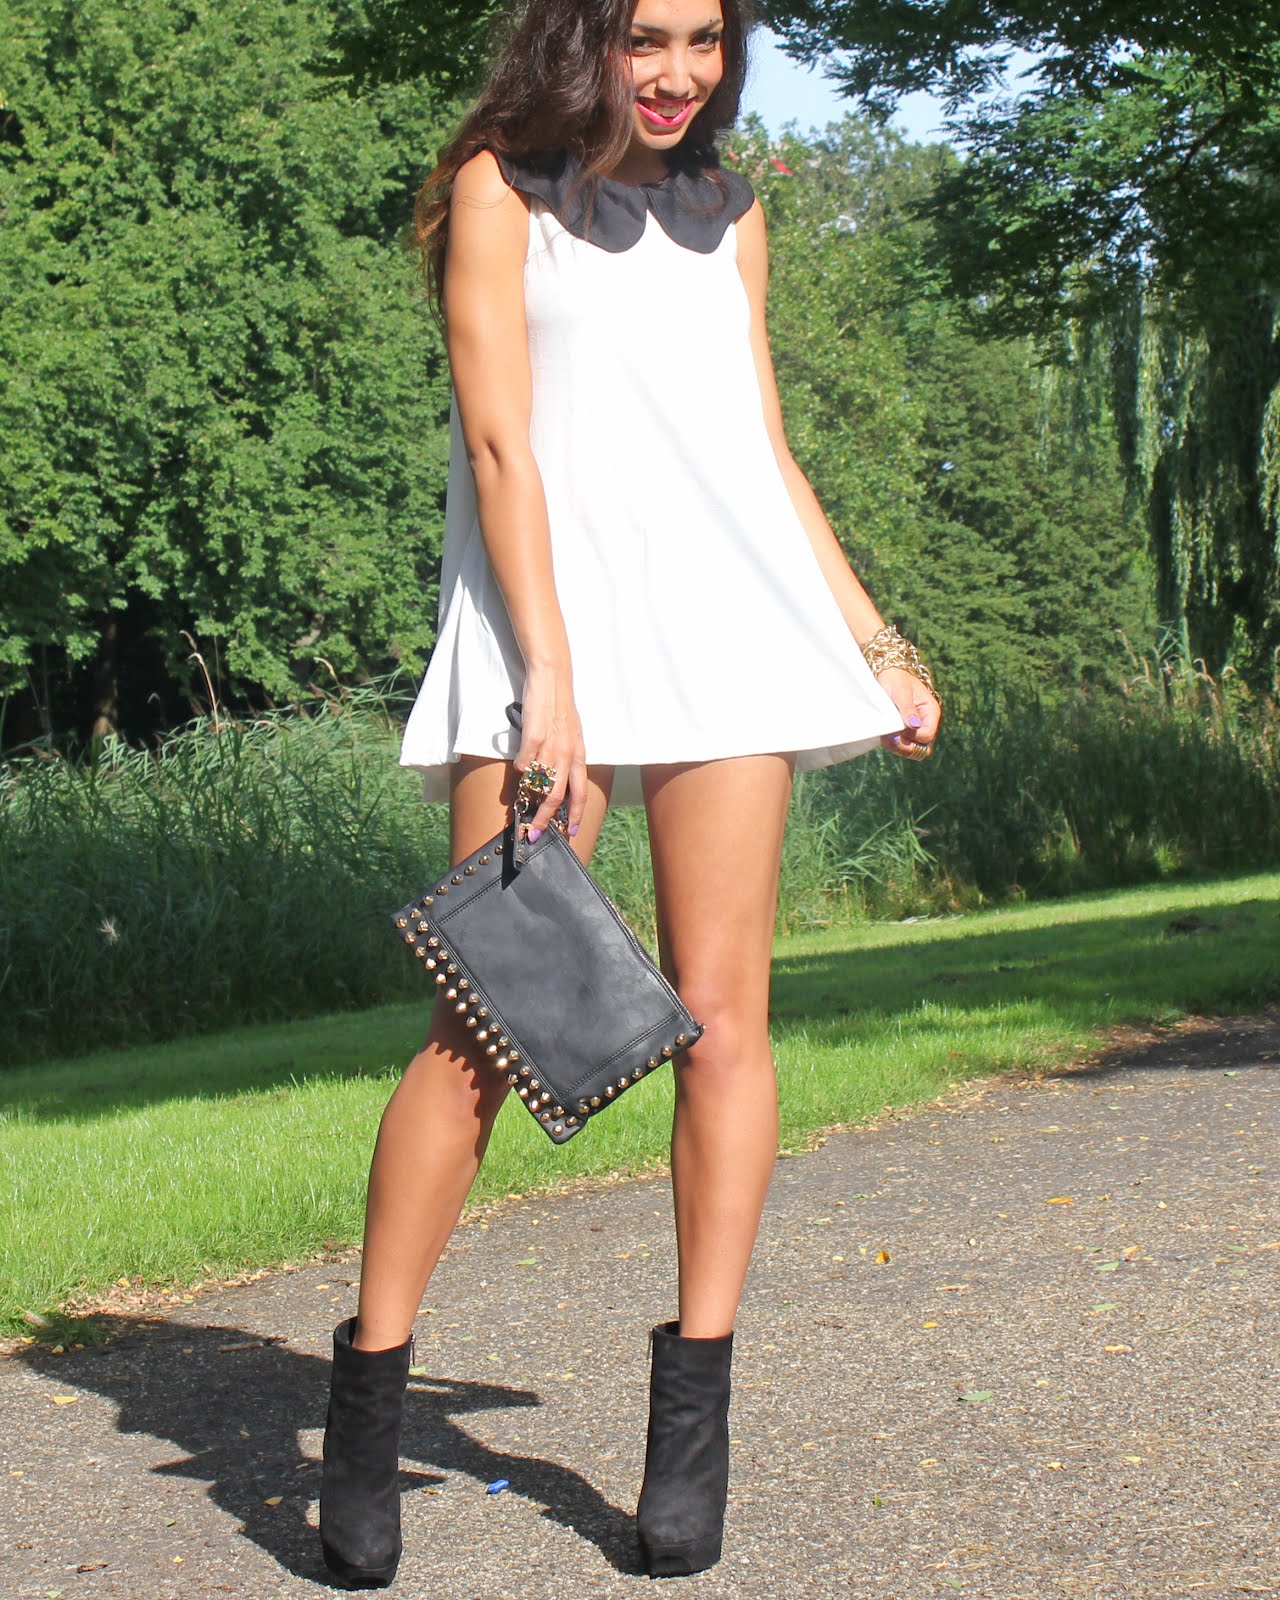 Short dress, long legs - FROM HATS TO HEELSFROM HATS TO HEELS